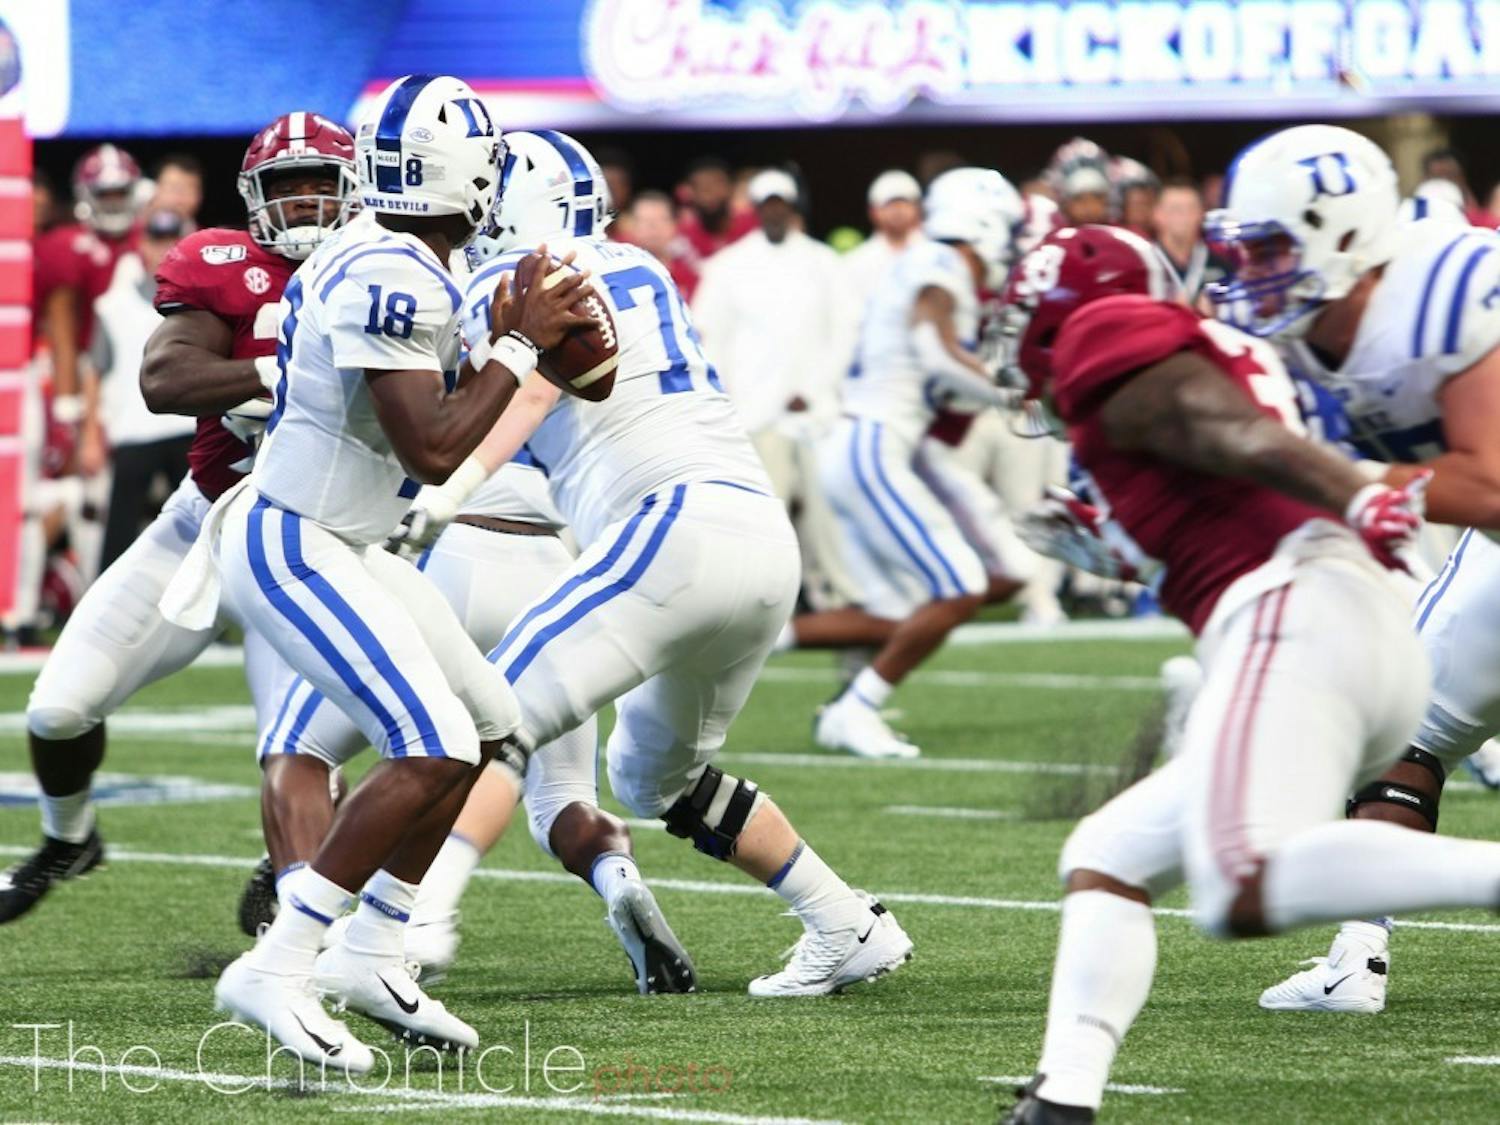 Despite the lopsided score, Duke showed promise early on in its white uniforms against Alabama.